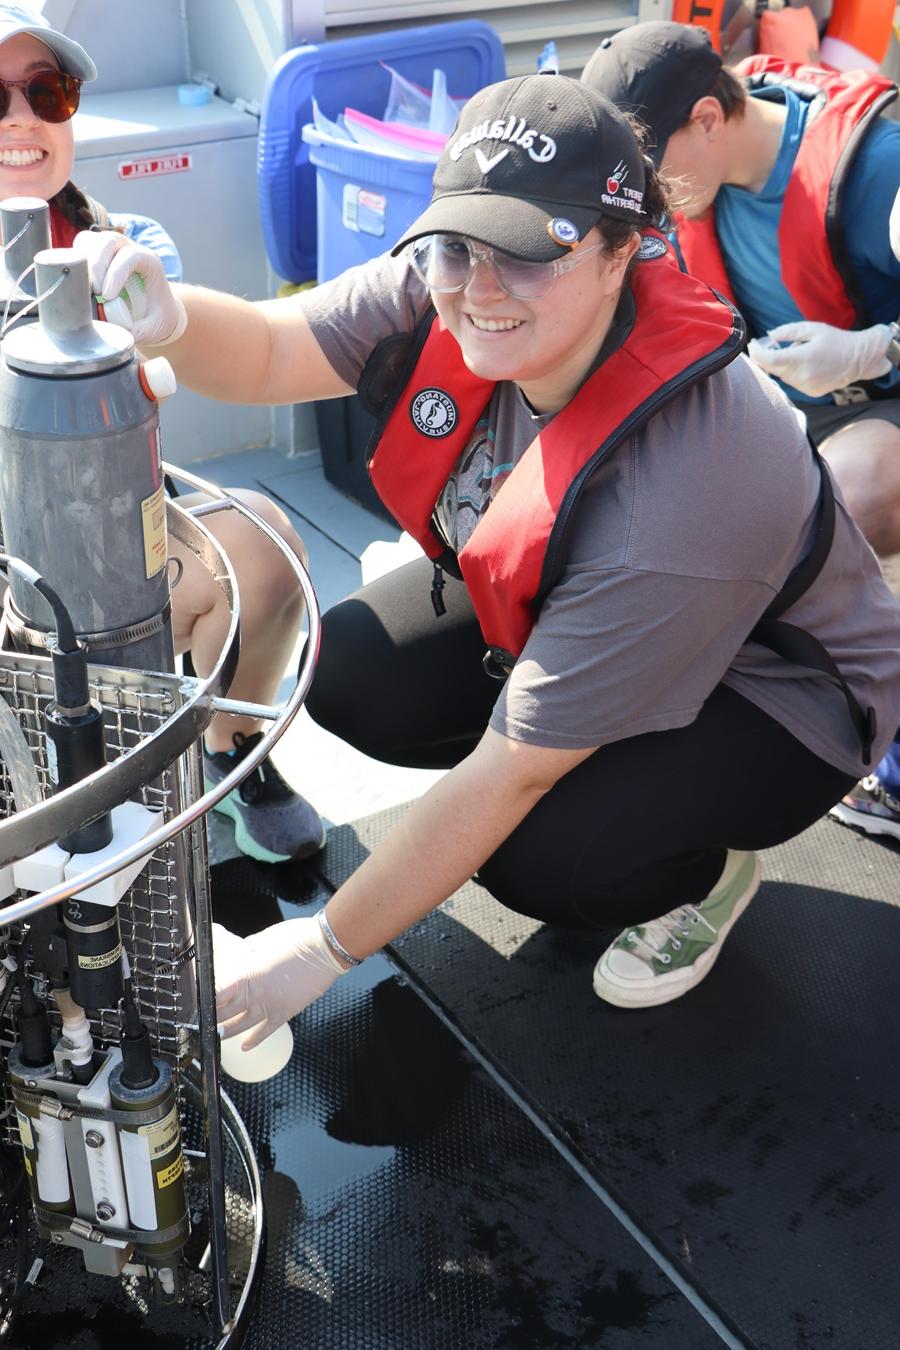 Northwest student Lauren Valenzuela spent her fall semester at the Bigelow Laboratory for Ocean Sciences in East Boothbay, 缅因州, where she completed additional coursework and took advantage of opportunities to work on research projects. (Submitted photos)